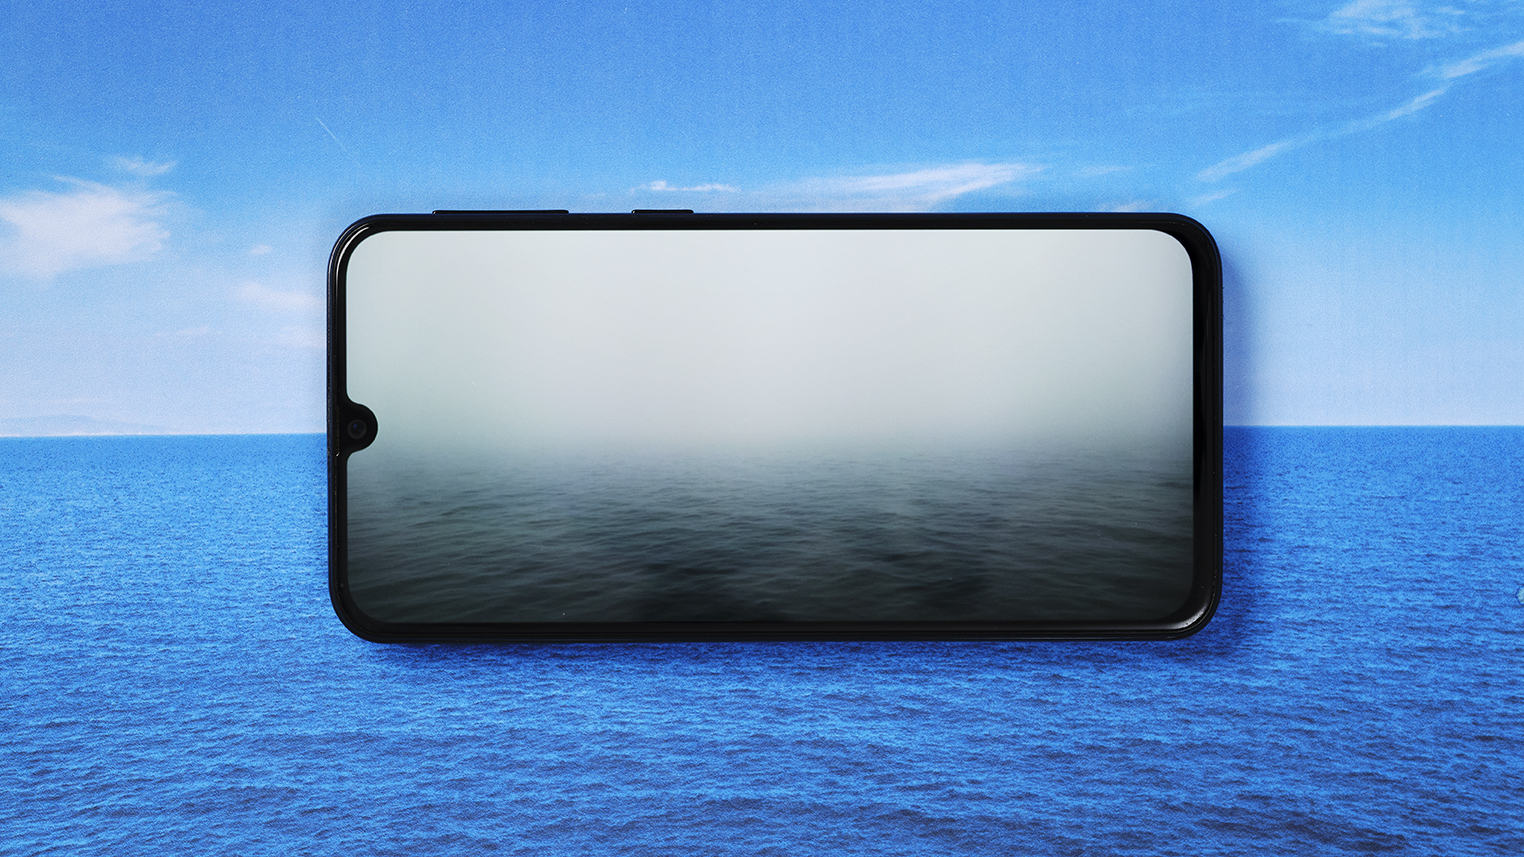 A foggy sea on a mobile phone screen over the image of a clear ocean.